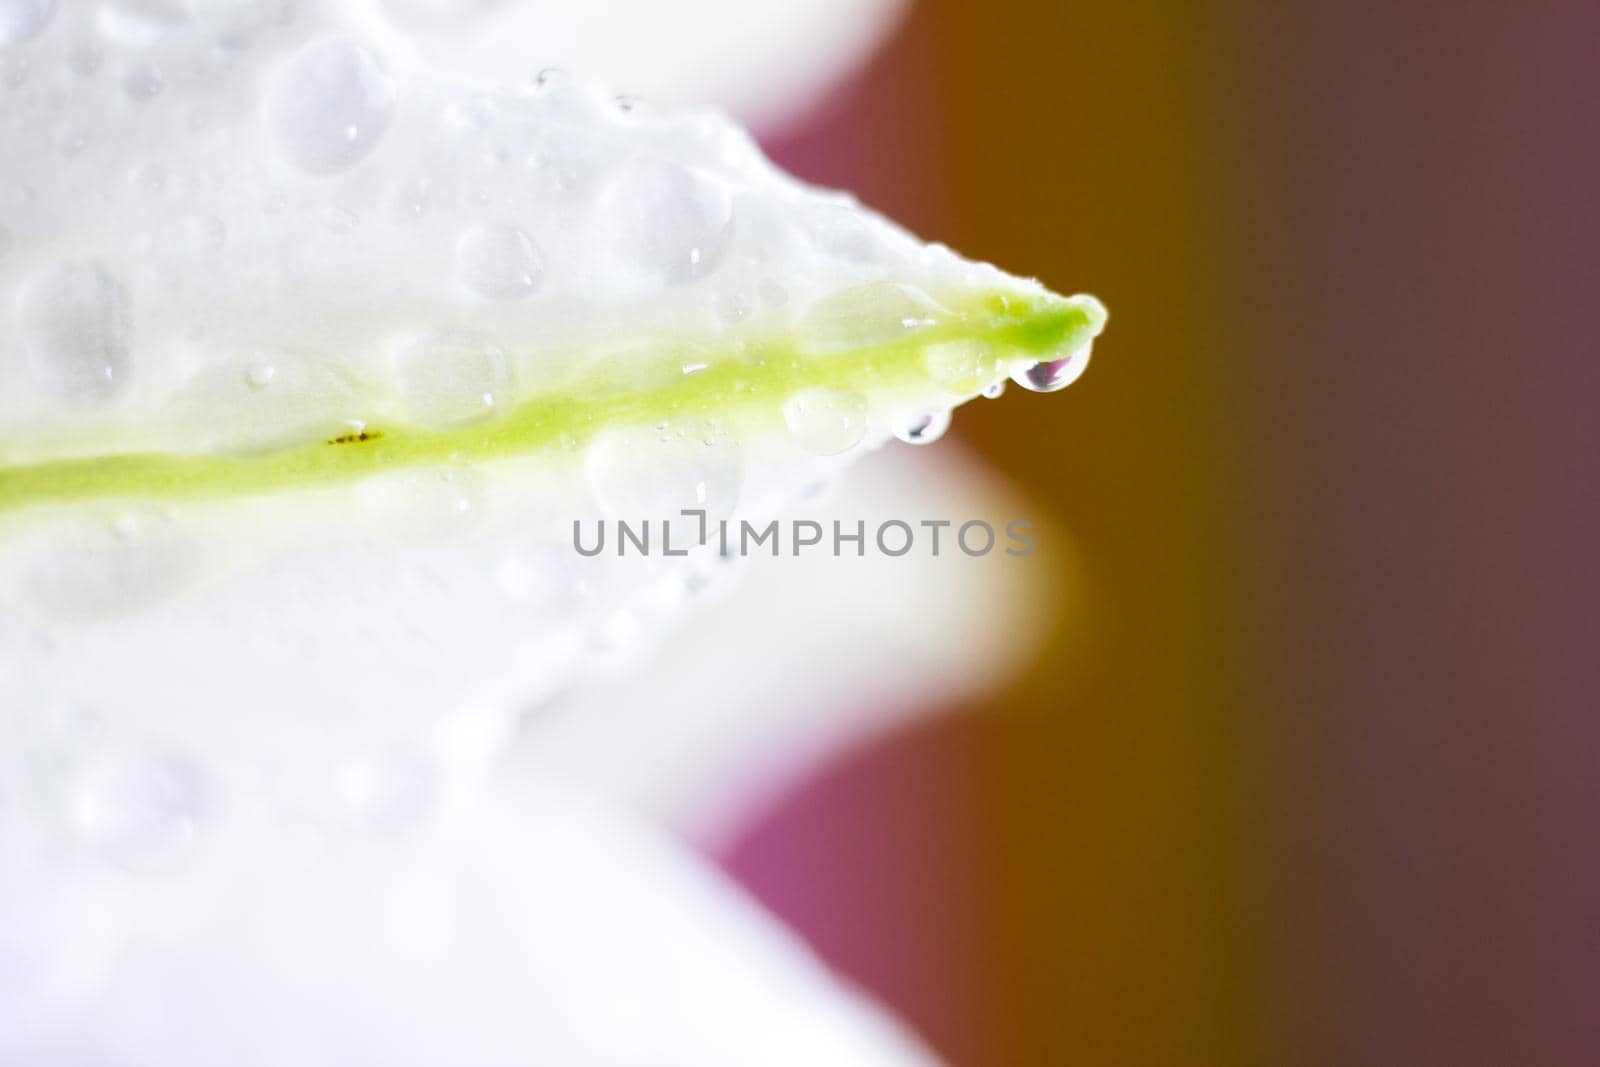 Macro flower blossom with water droplet. Abstract nature blurred background. Beautiful Macro shot with tender wet blossom. High quality photo